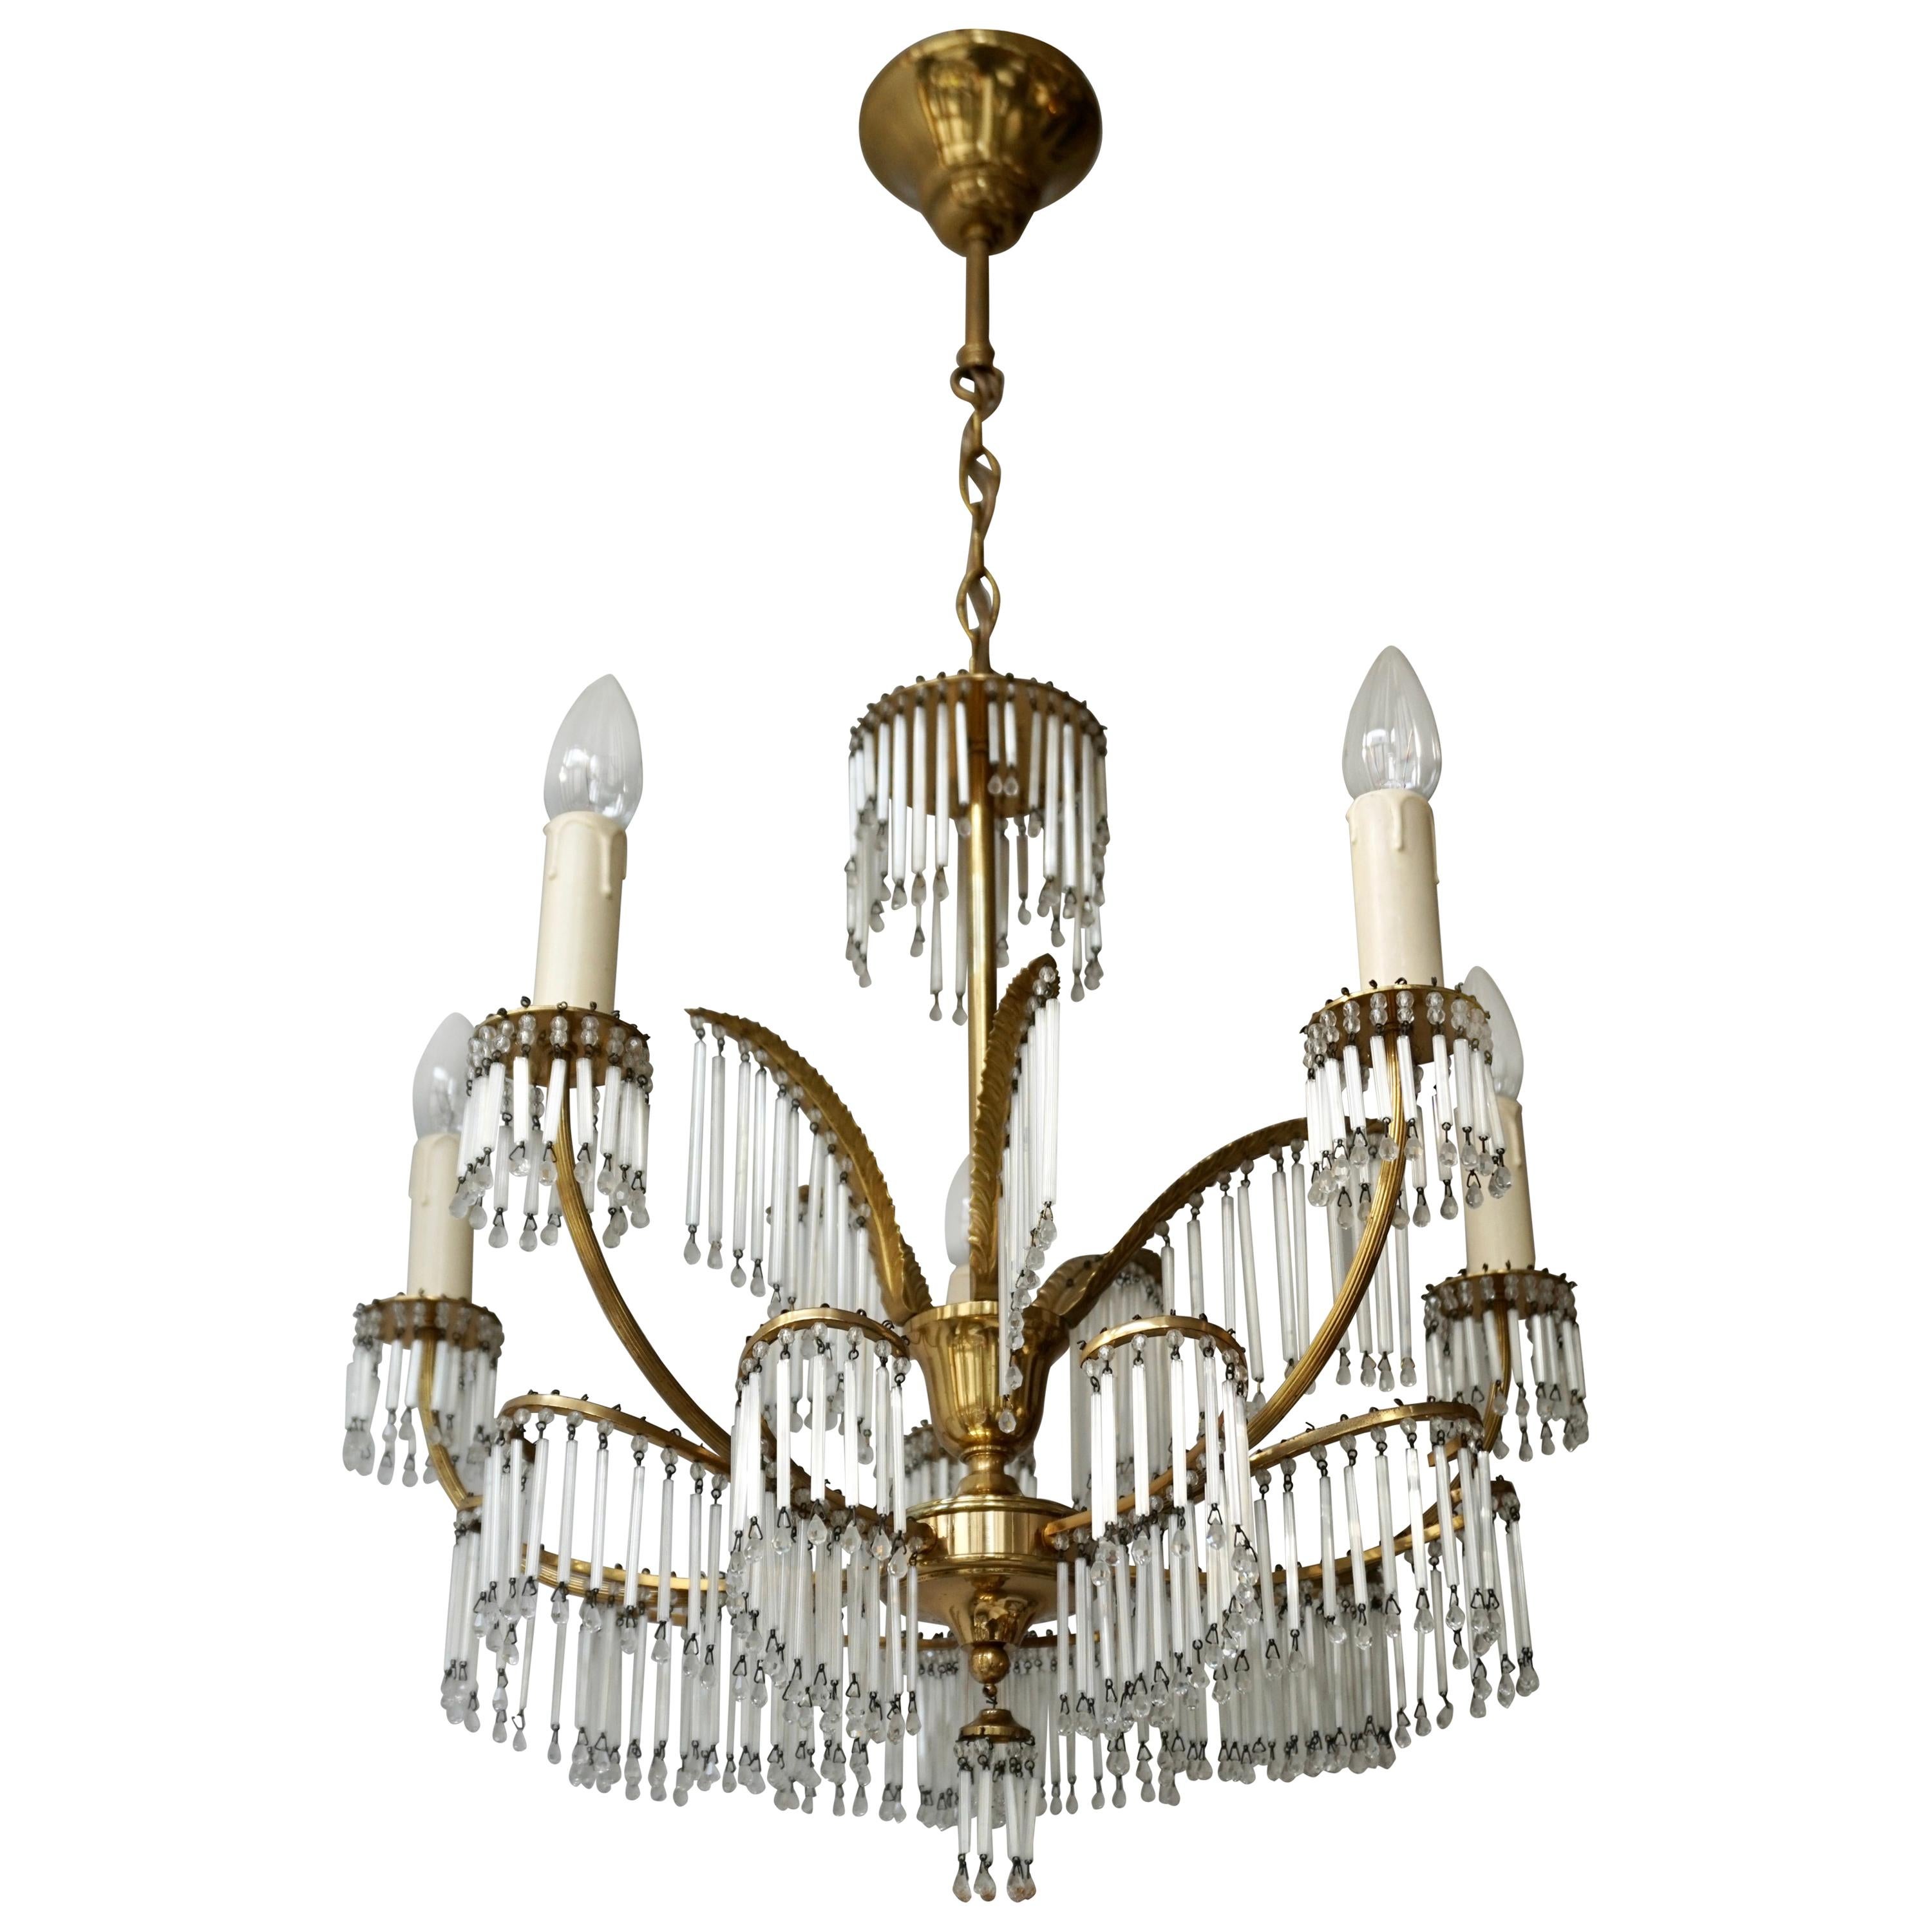 Glass and Brass Gilt Palm Leaf Chandelier in the Style of Maison Jansen